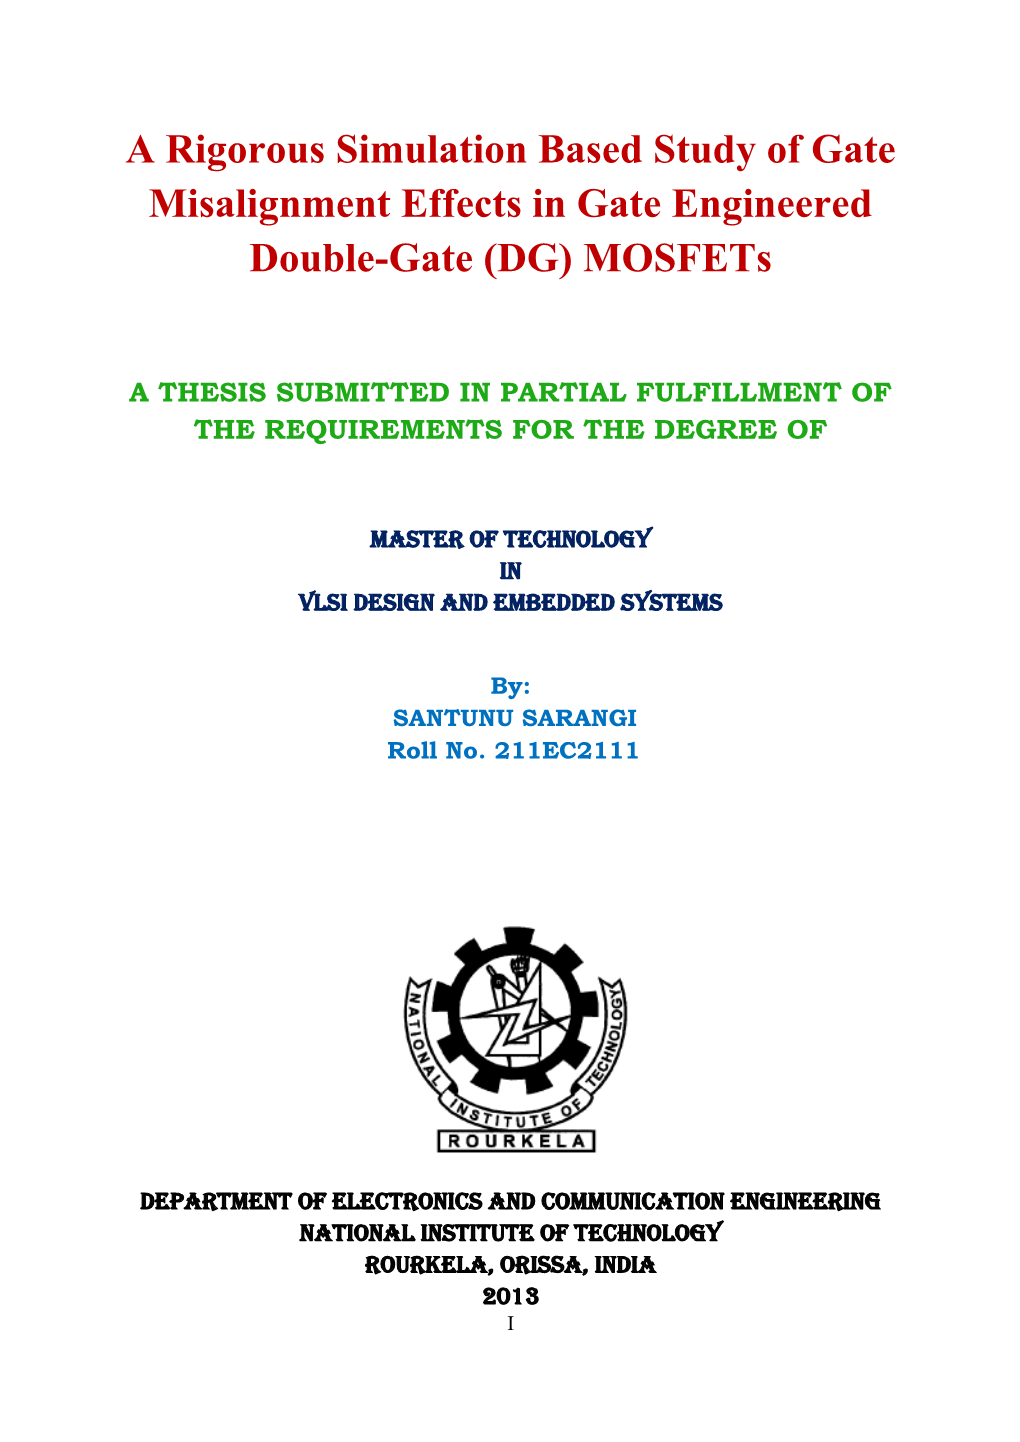 A Rigorous Simulation Based Study of Gate Misalignment Effects in Gate Engineered Double-Gate (DG) Mosfets